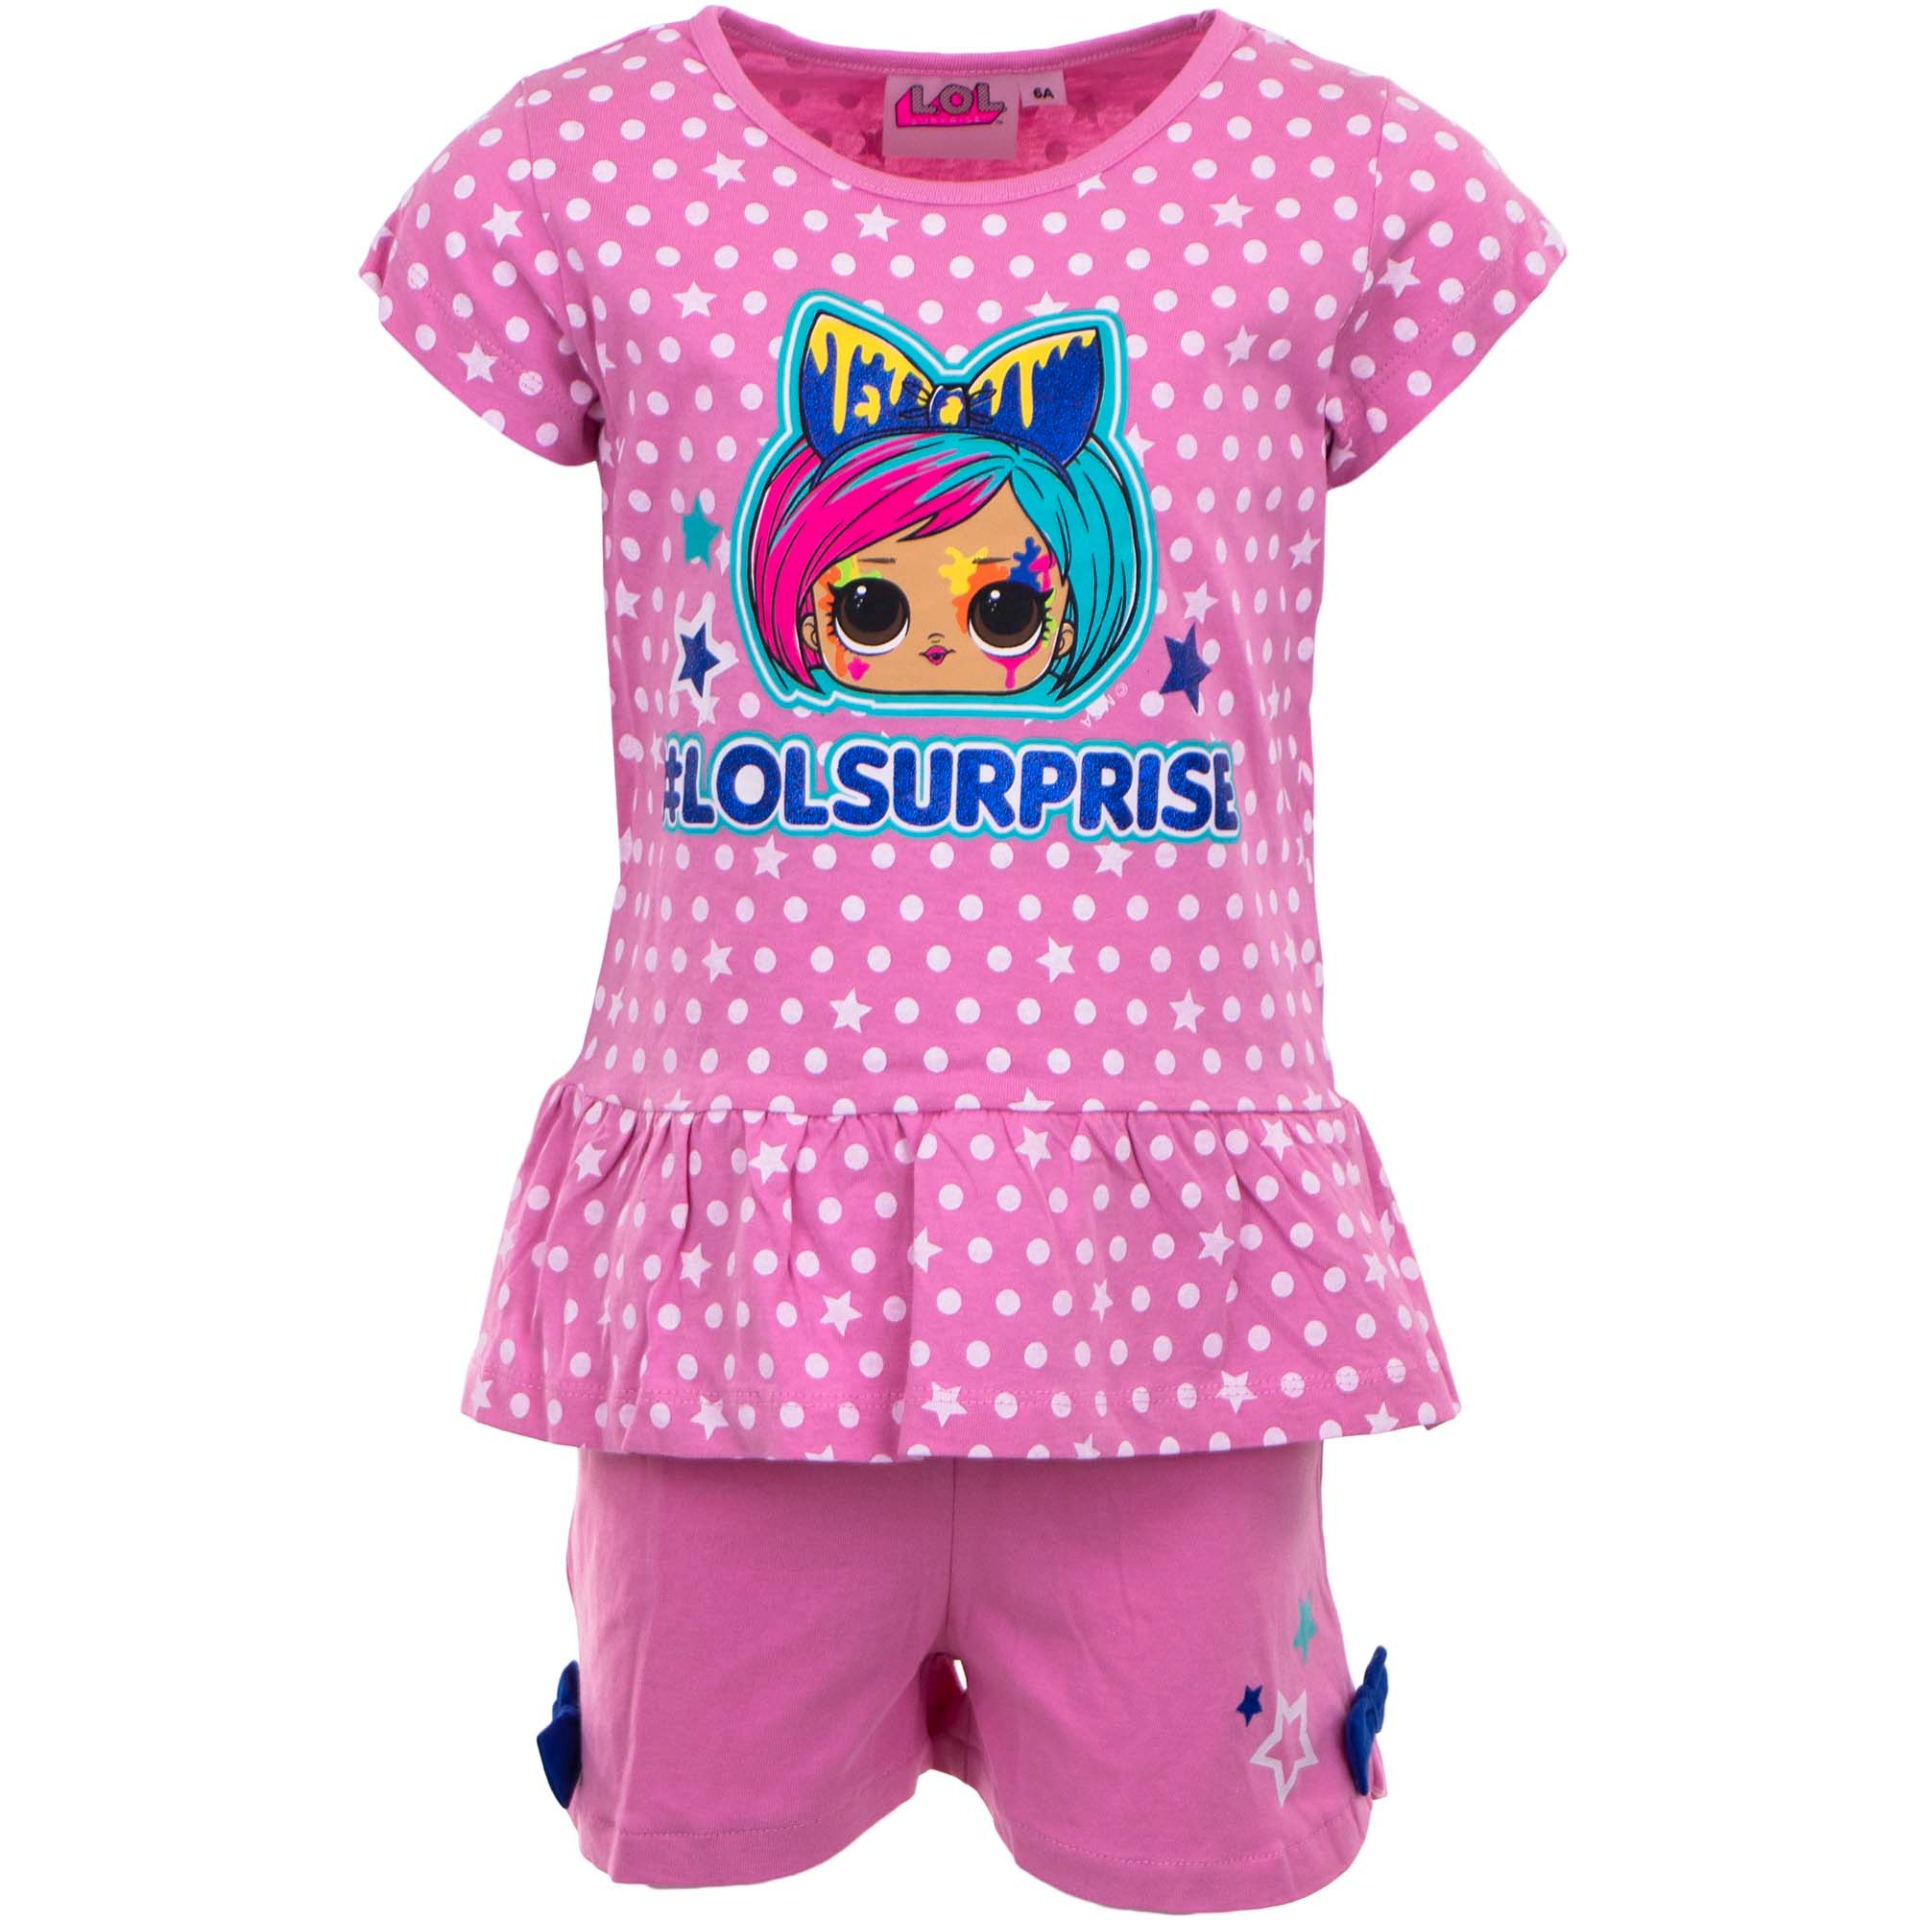 clothes-for-children-wholesale-disney-characters0025_-_ue2044_1_